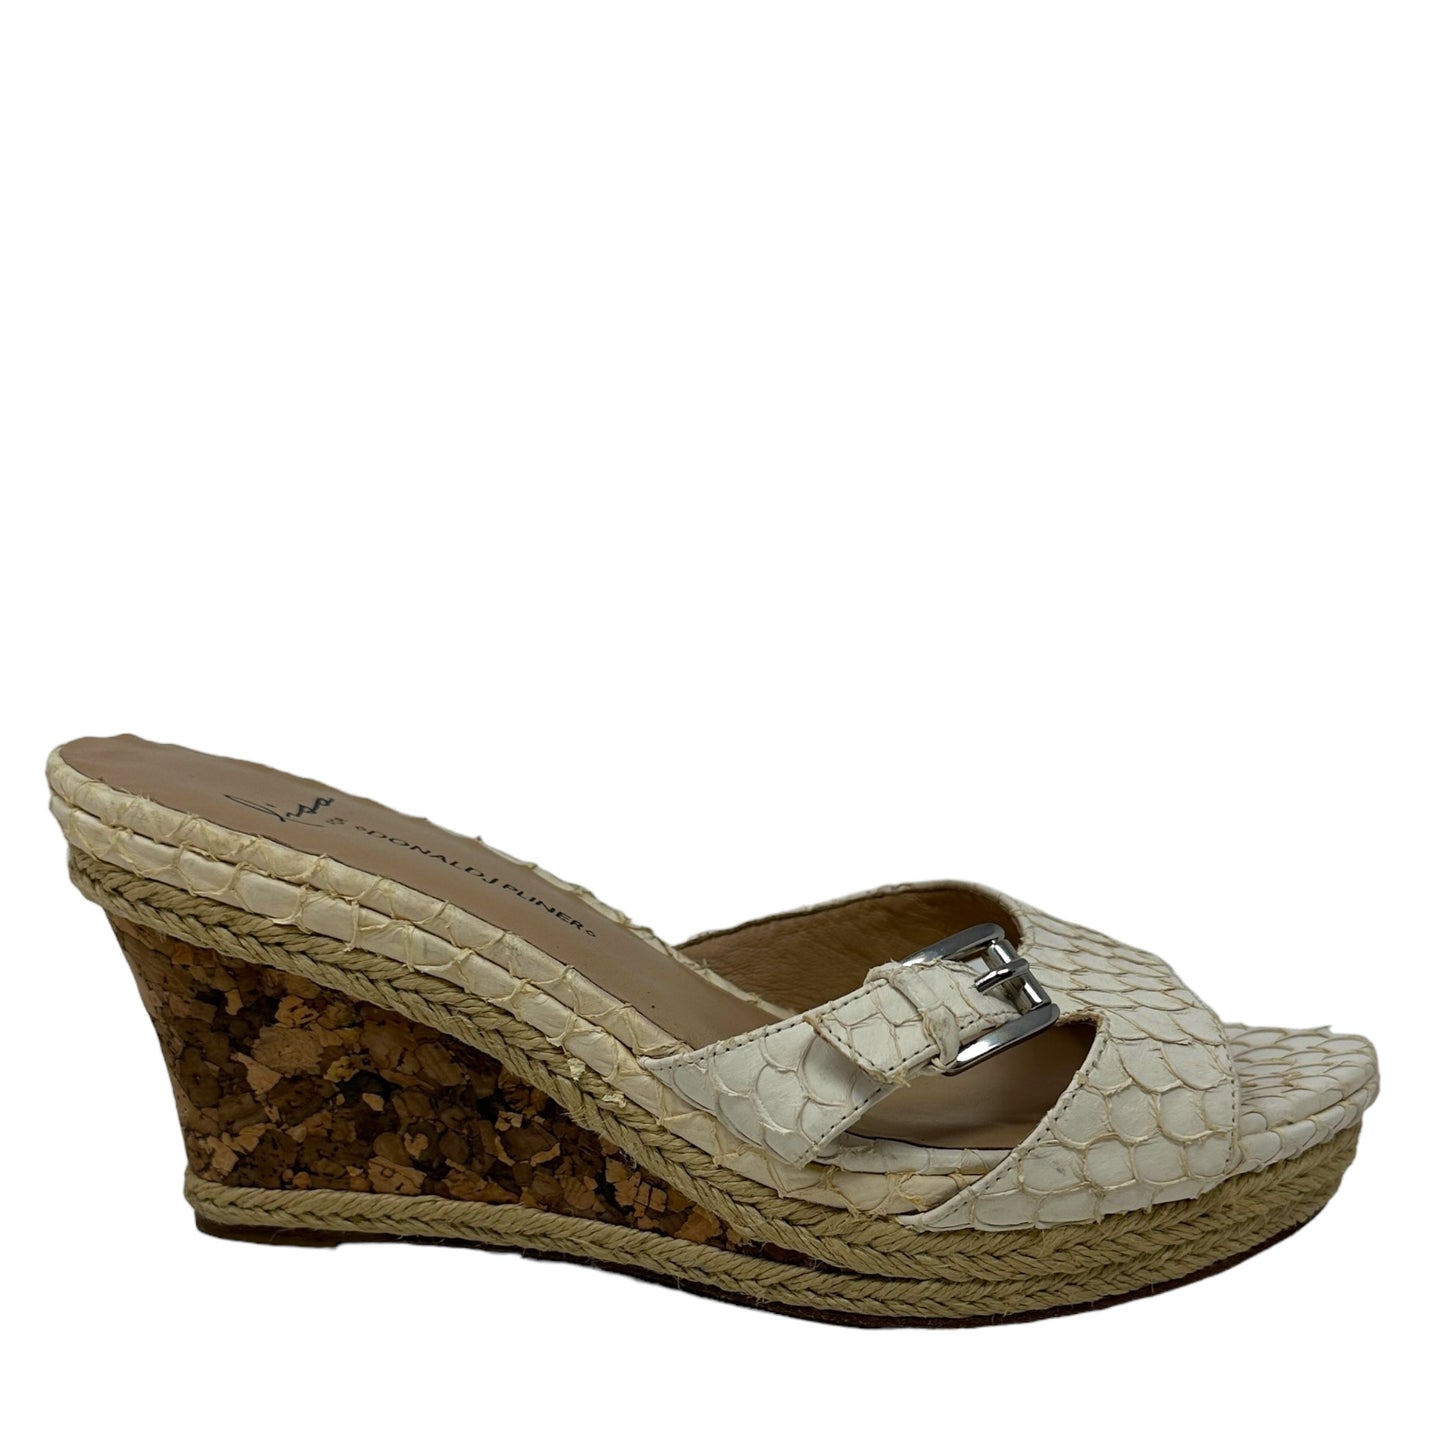 Python Print Cork Heel Wedge Mules By Lisa for Donald Pliner  Size: 8.5